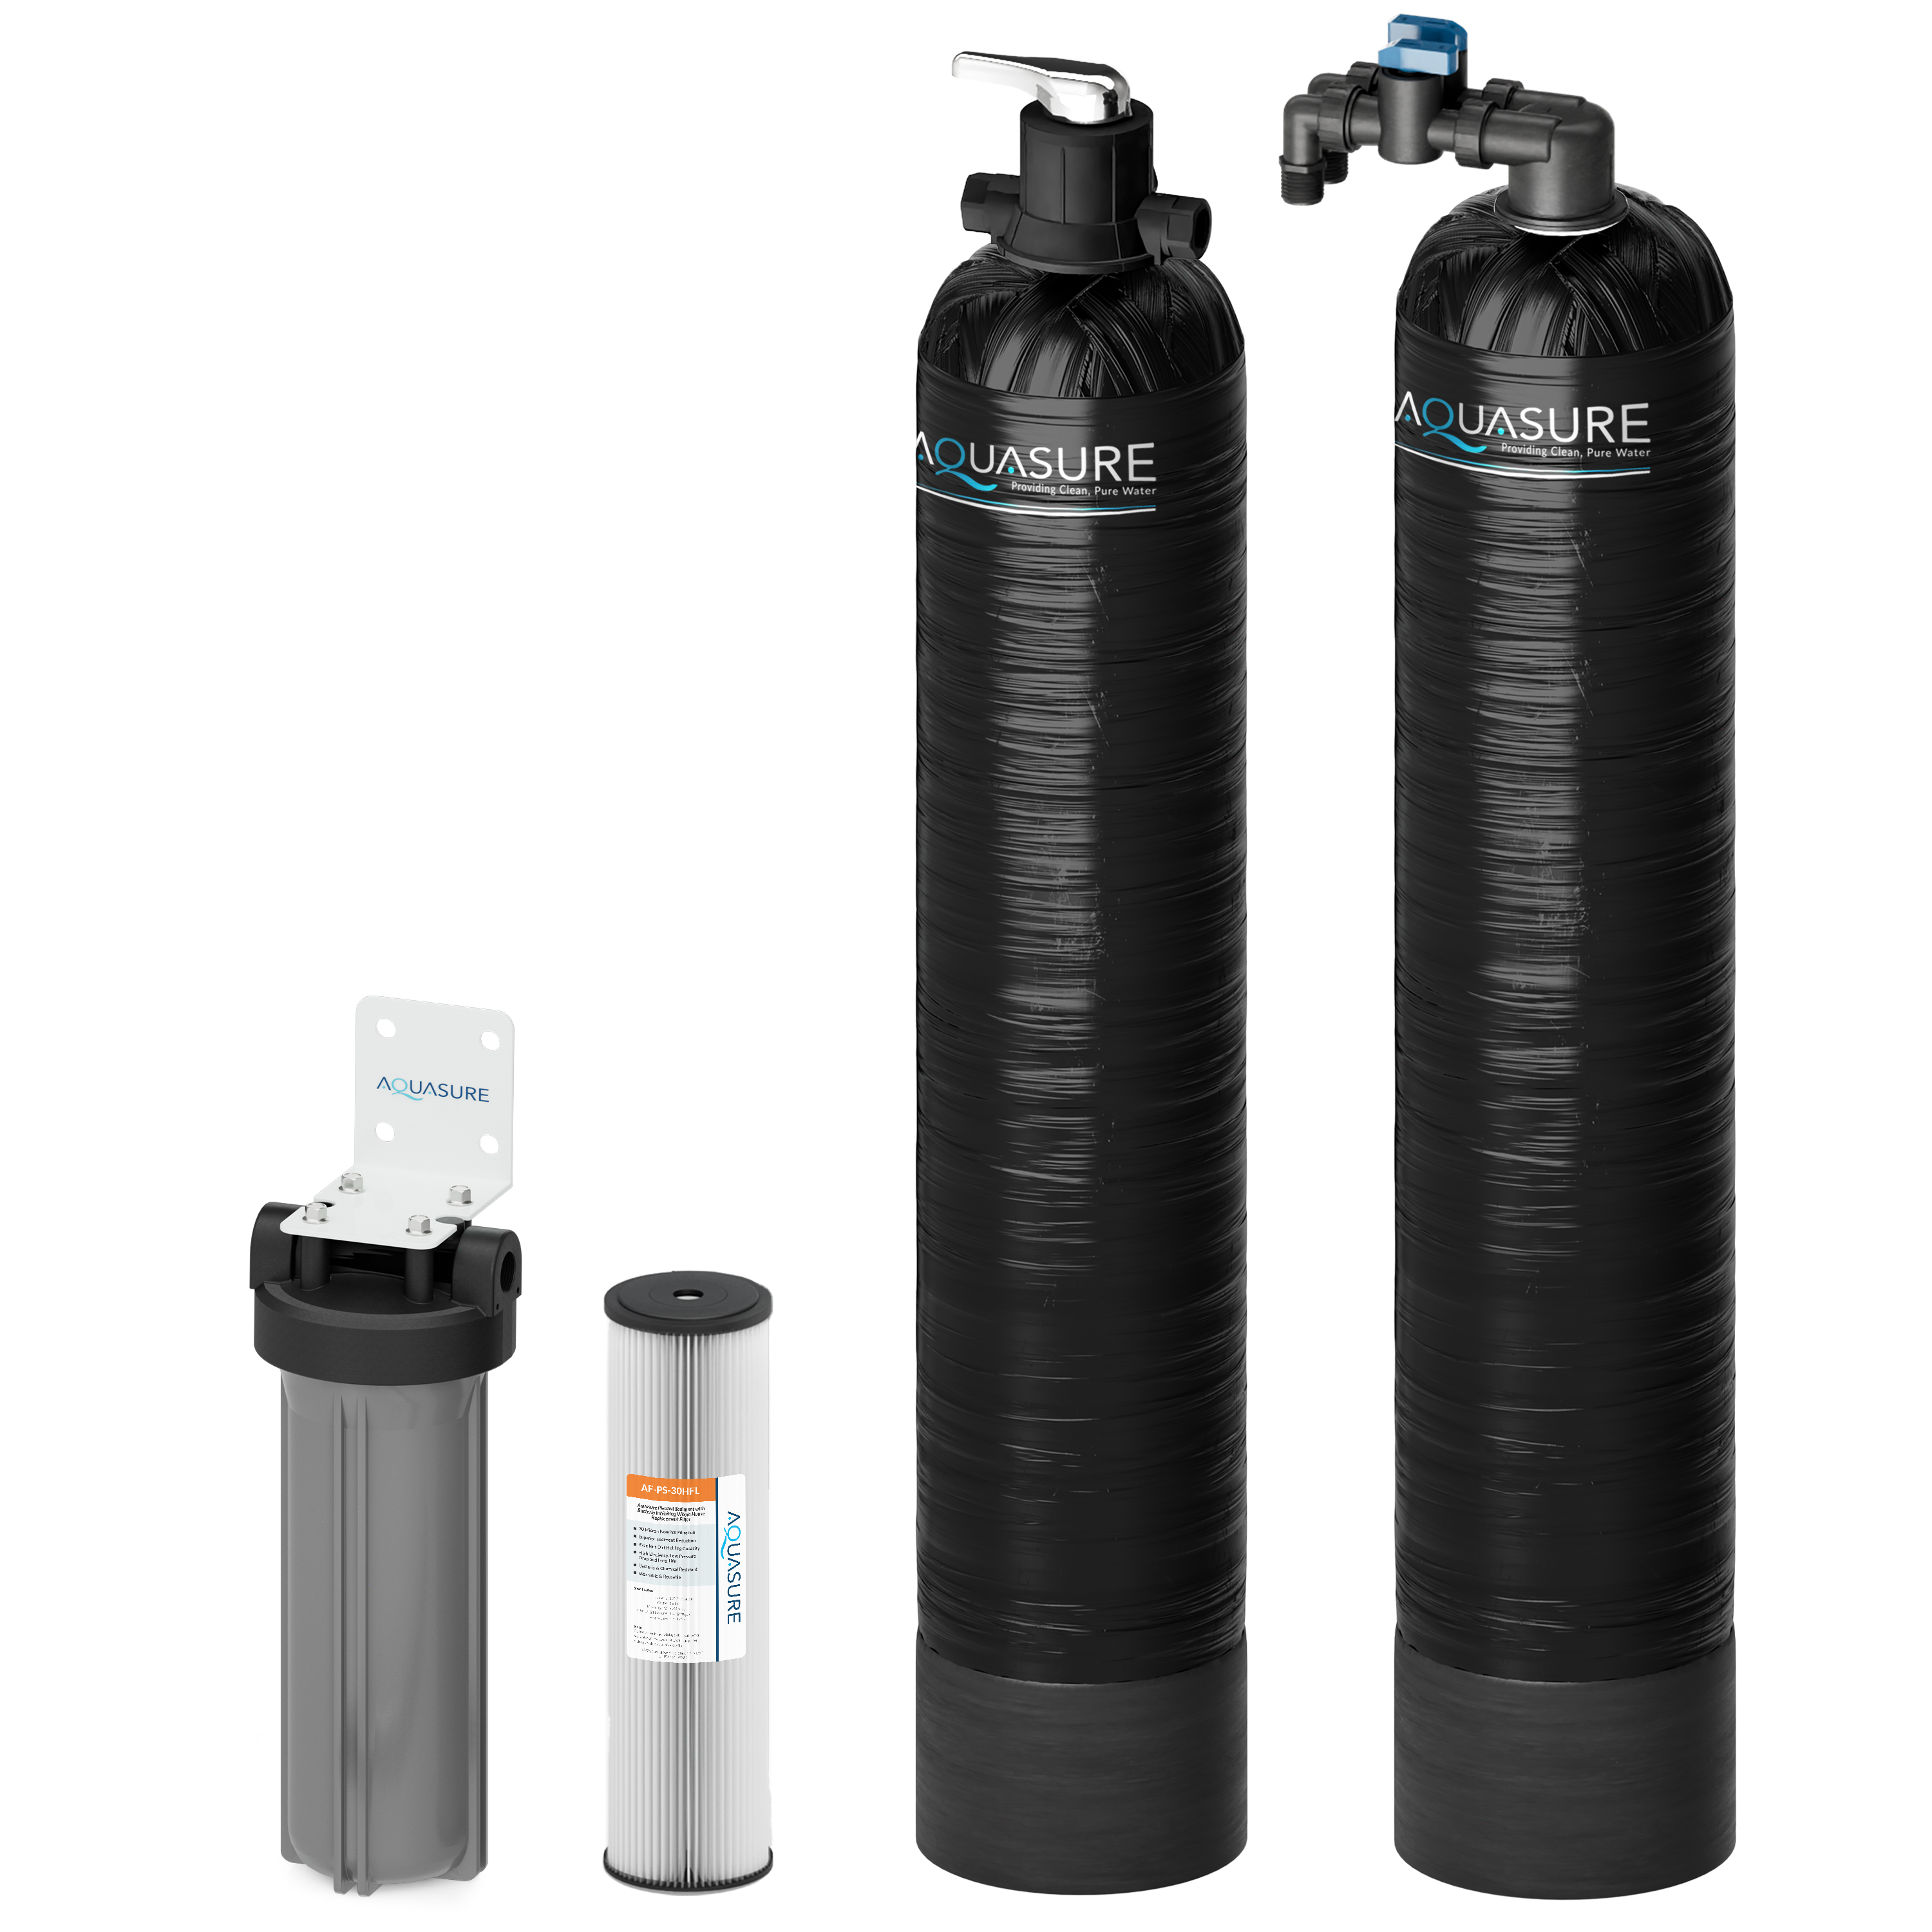 Aquasure Serene Series 15 GPM Salt-Free Conditioning Bundle with Whole House Water Treatment System & Pleated Sediment Pre-Filter